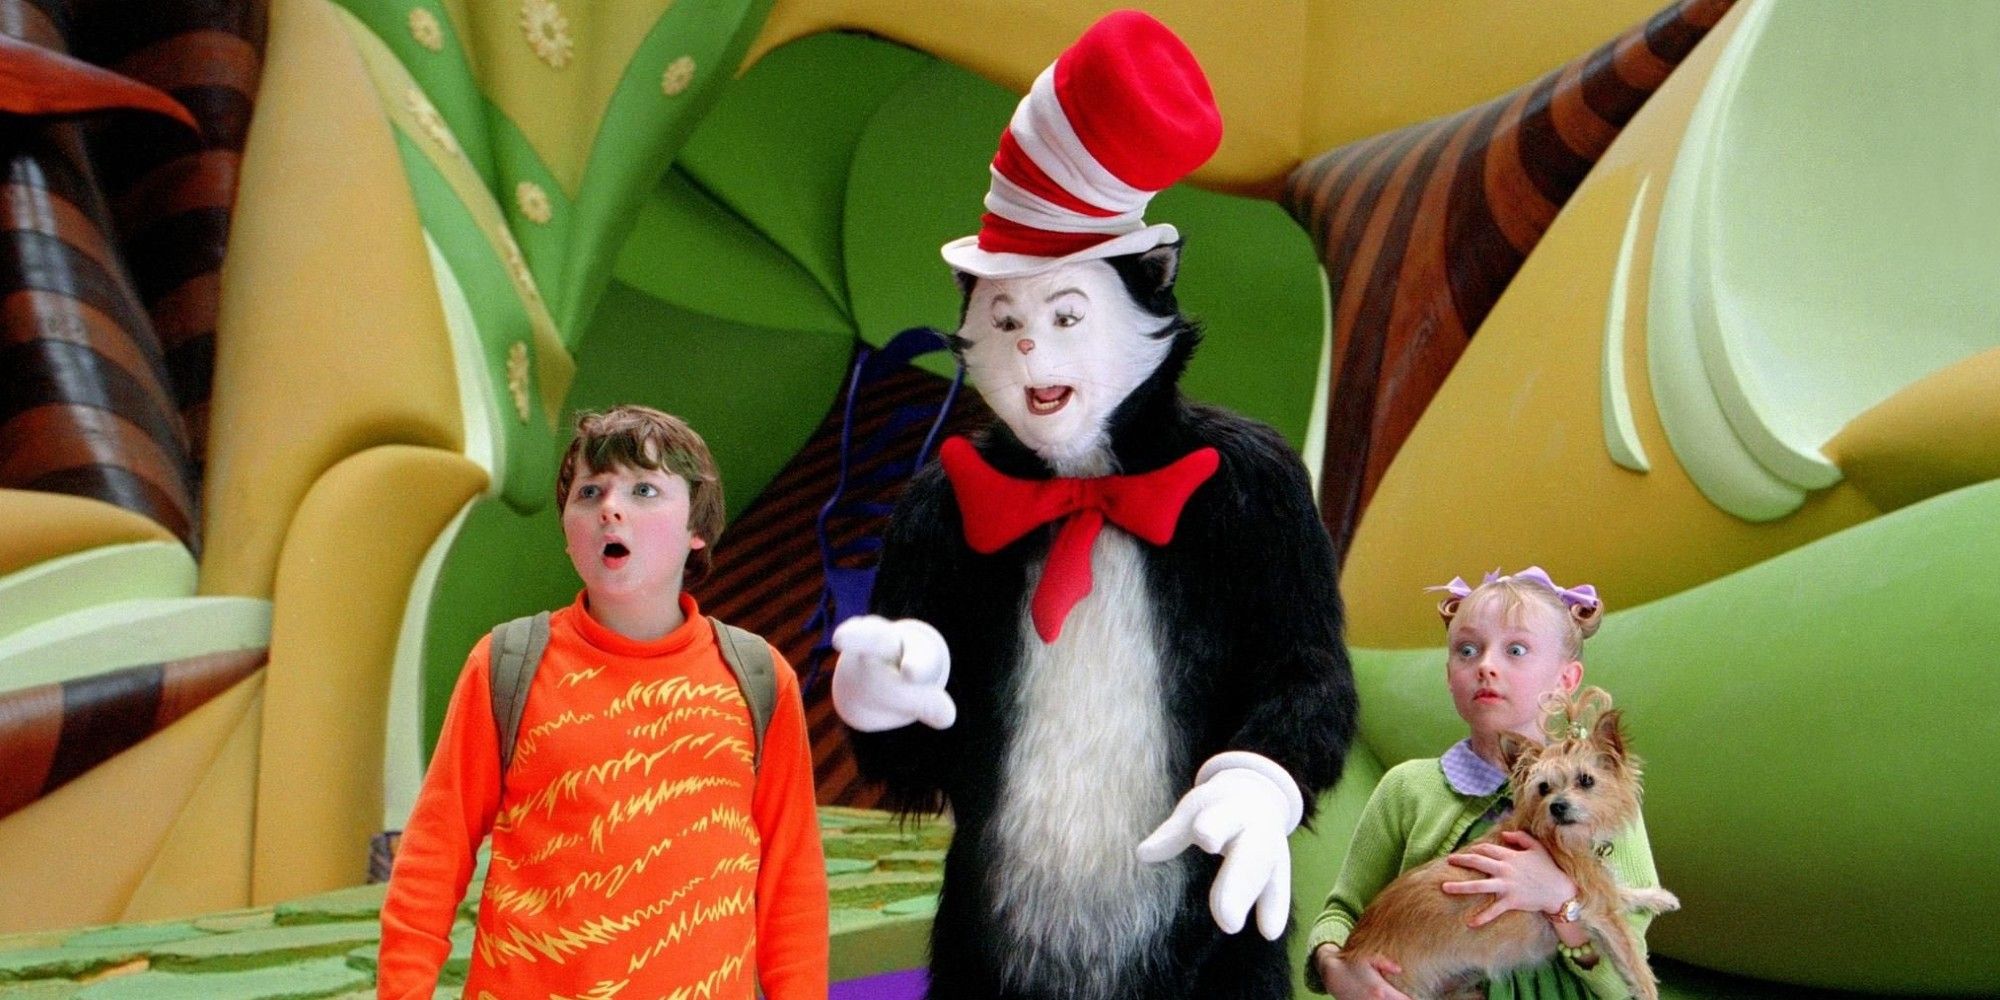 The Cat with Sally and Conrad in Dr. Seuss' The Cat in the Hat